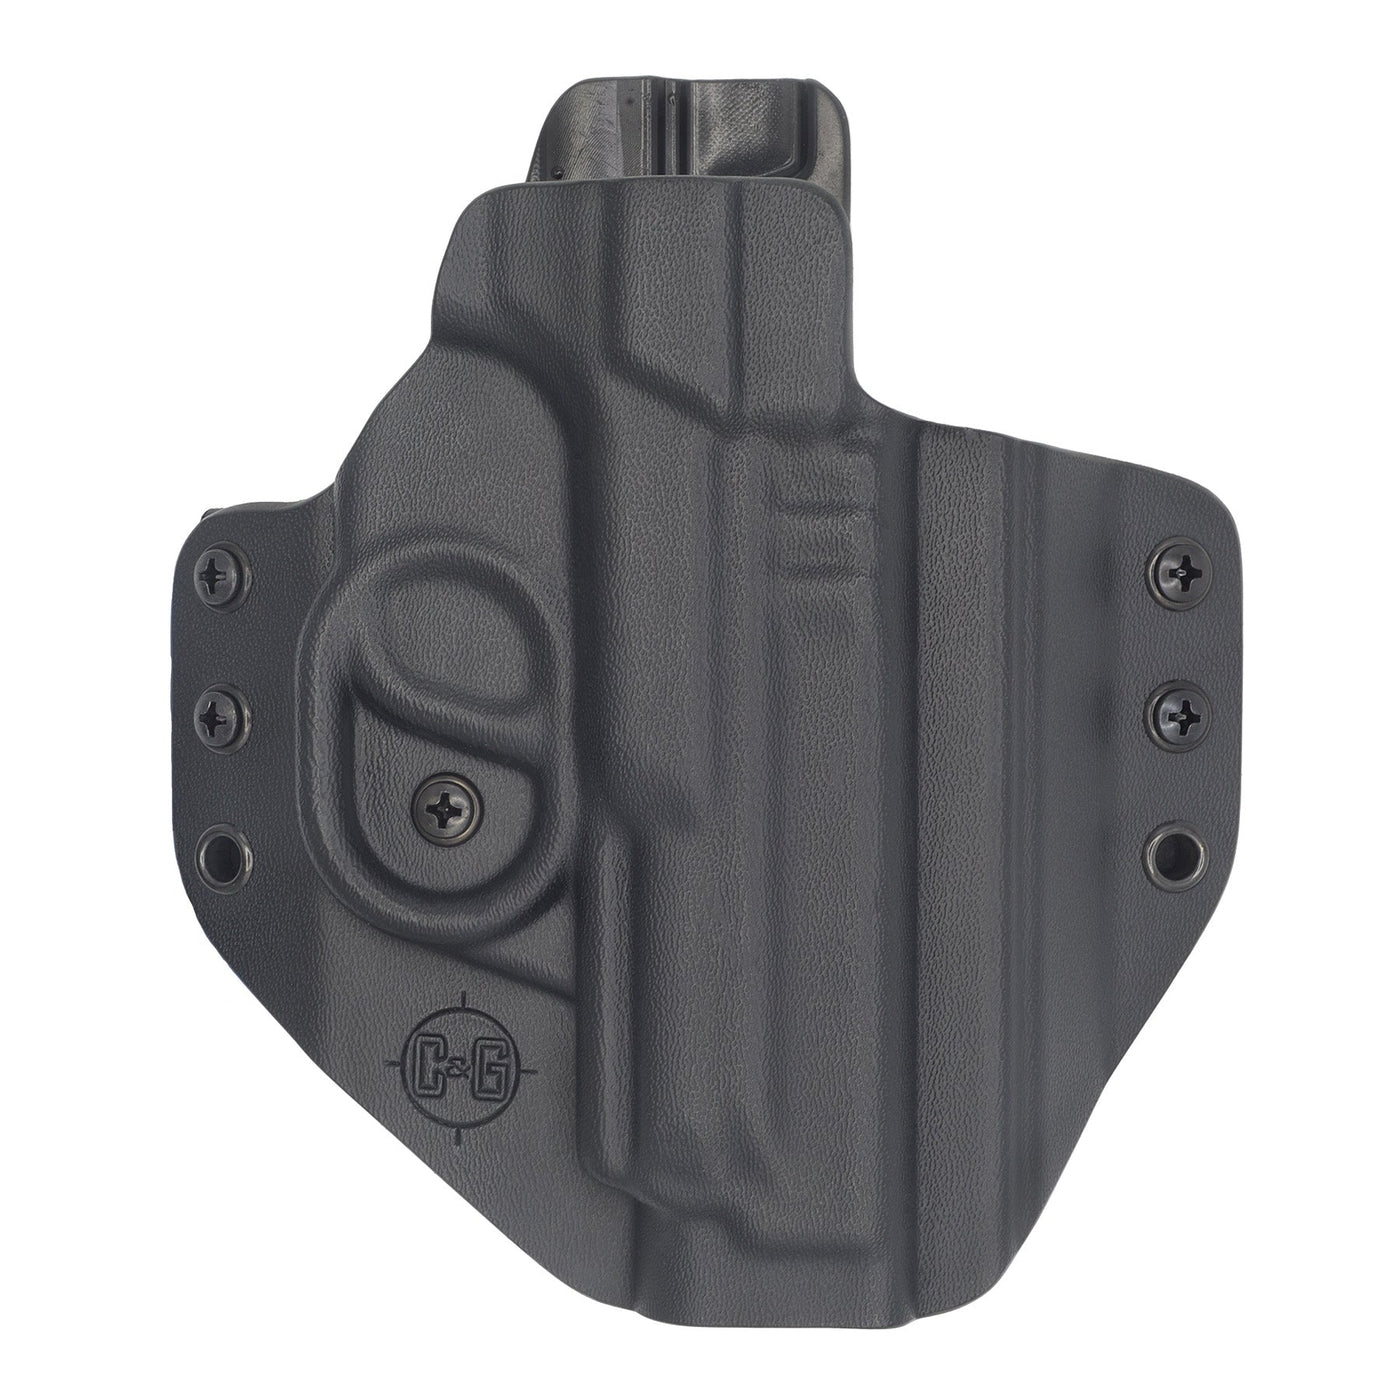 C&G Holsters custom Covert OWB kydex holster for Smith & Wesson M&P 2.0 9/40 in black front view without gun